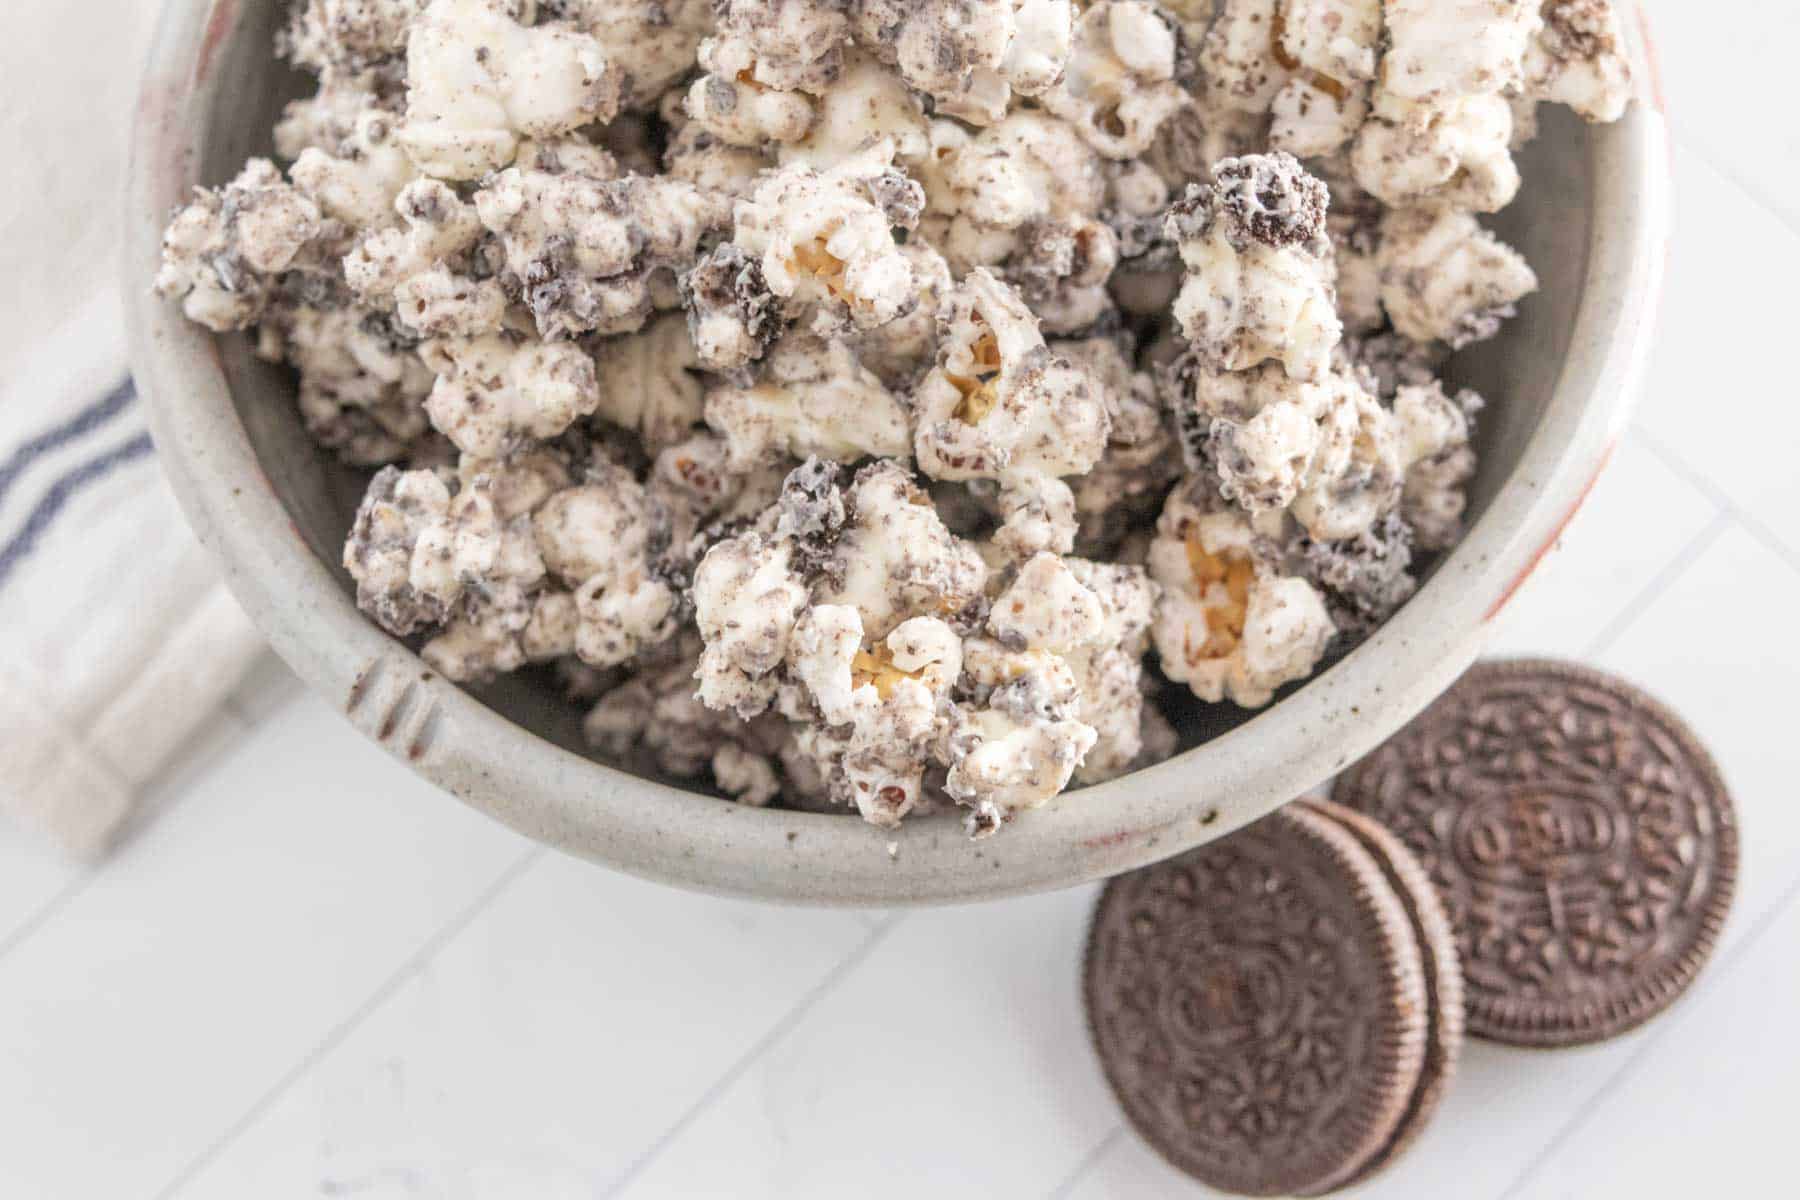 Oreo popcorn in a bowl with oreo cookies.